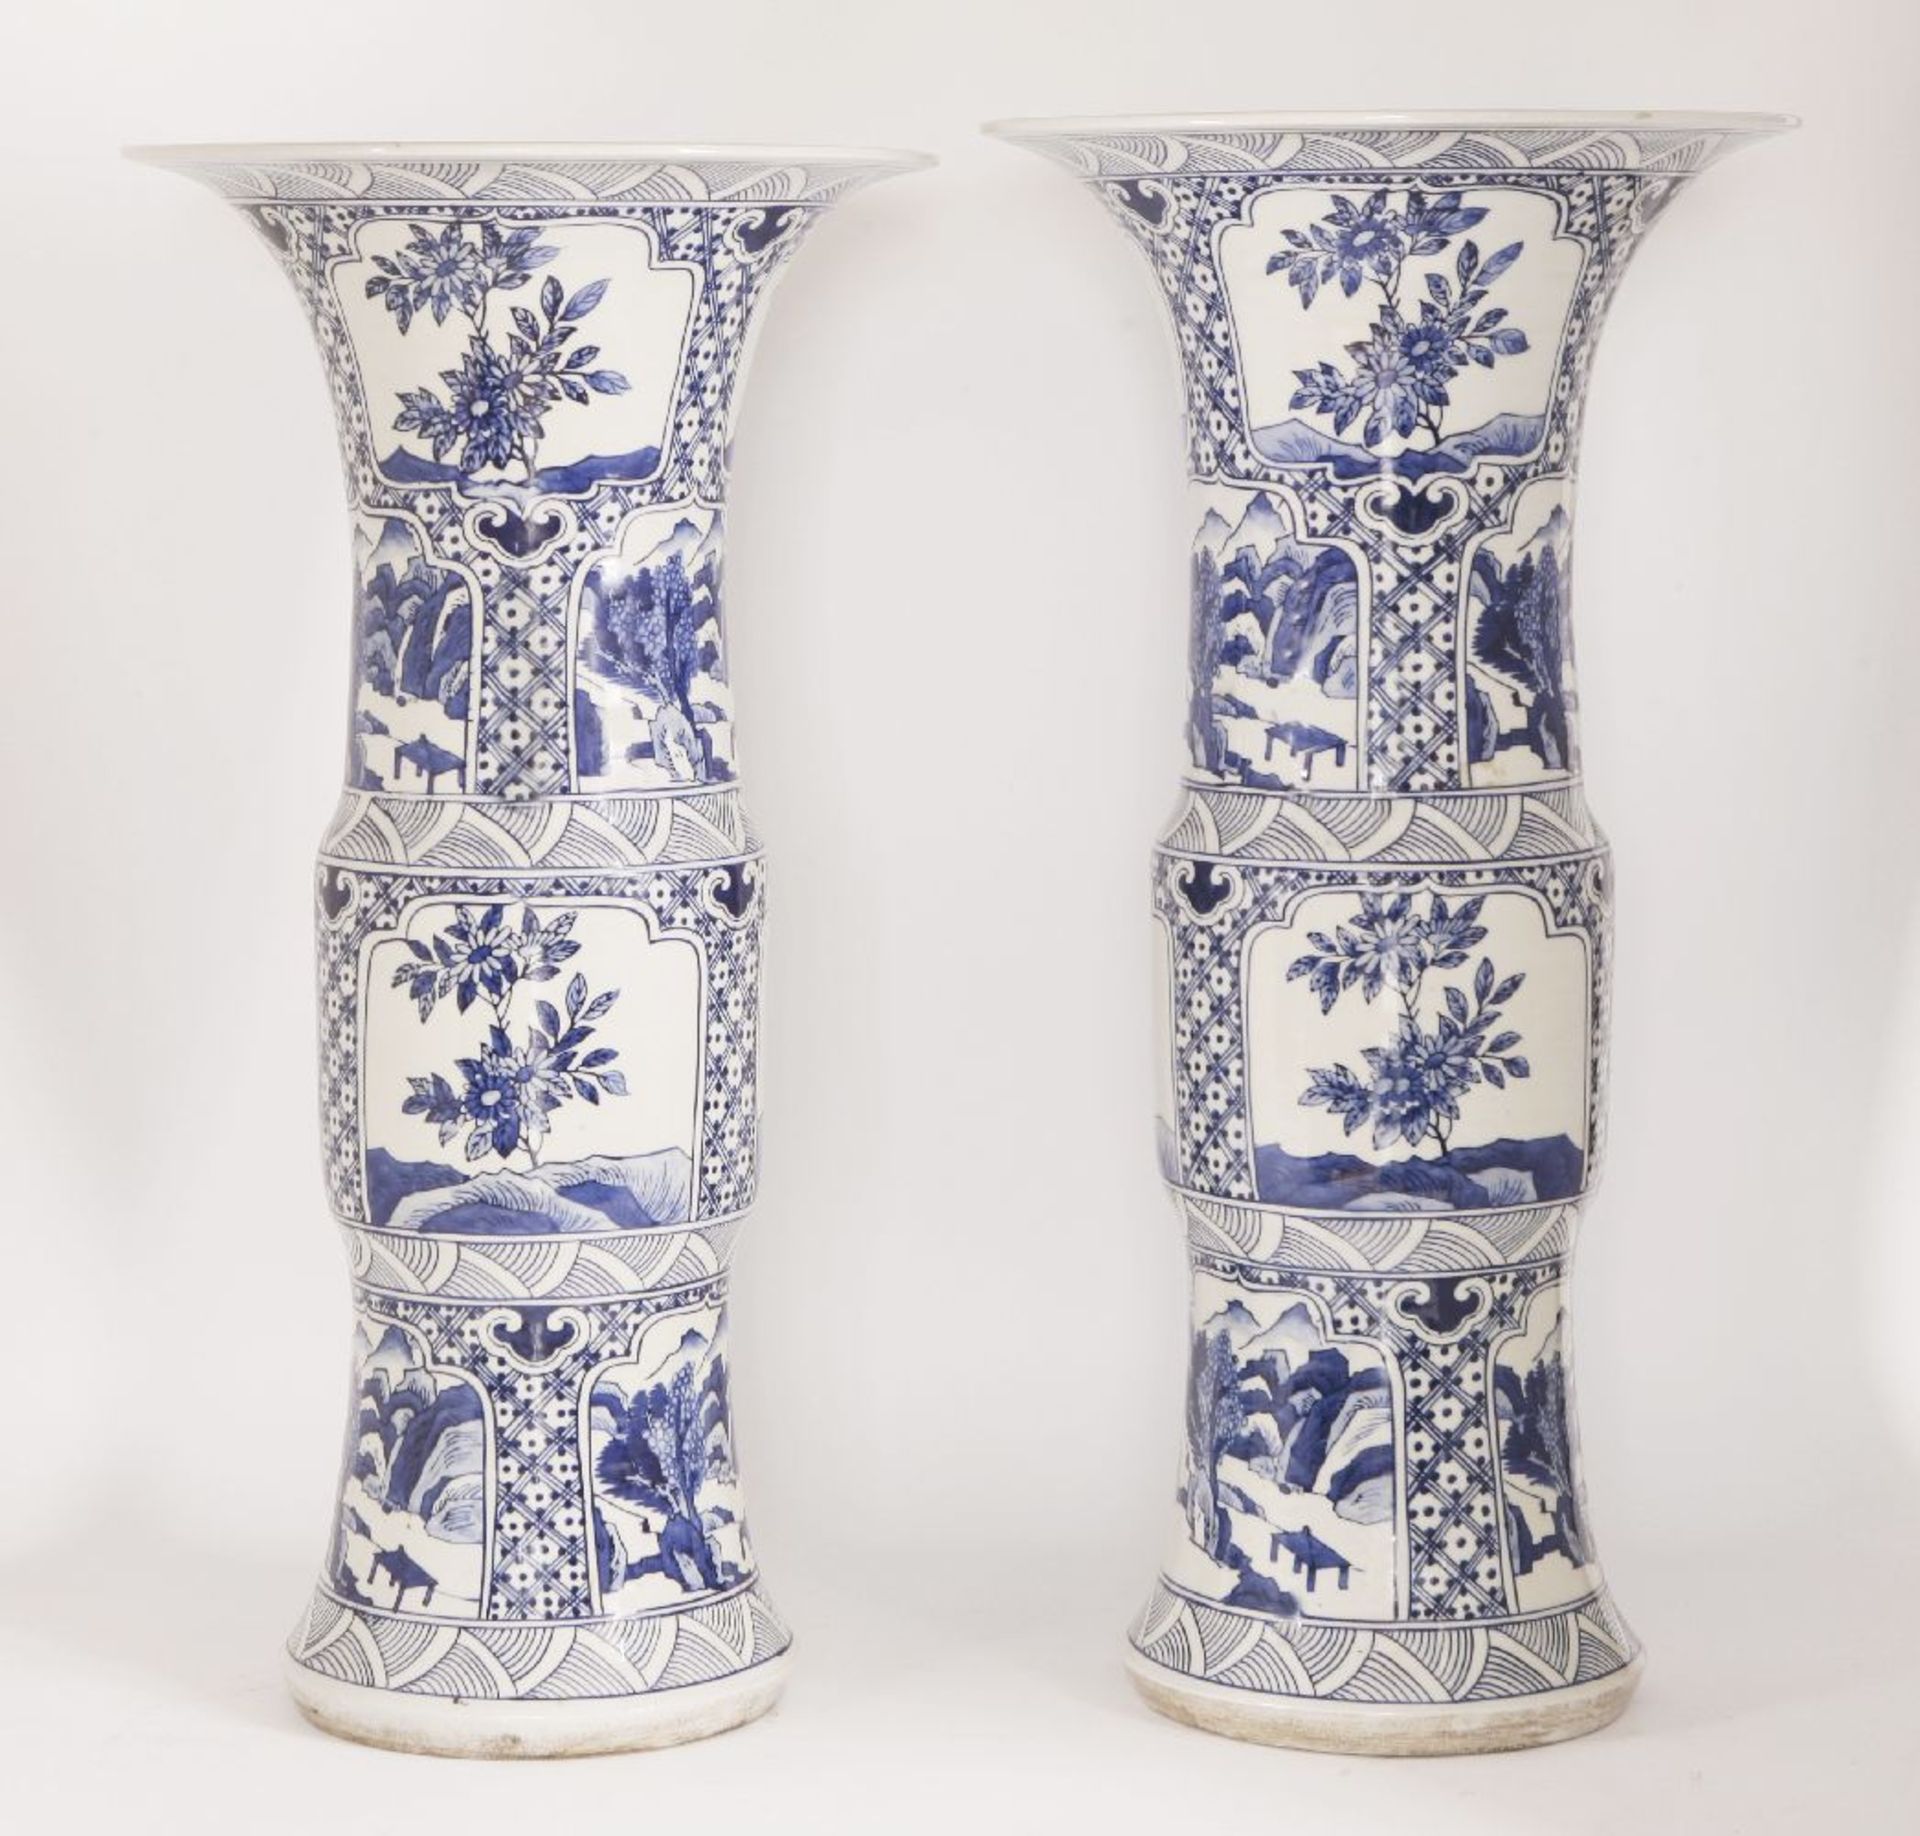 A pair of Chinese export ware blue and white gu form vases, 20th century, decorated all over with